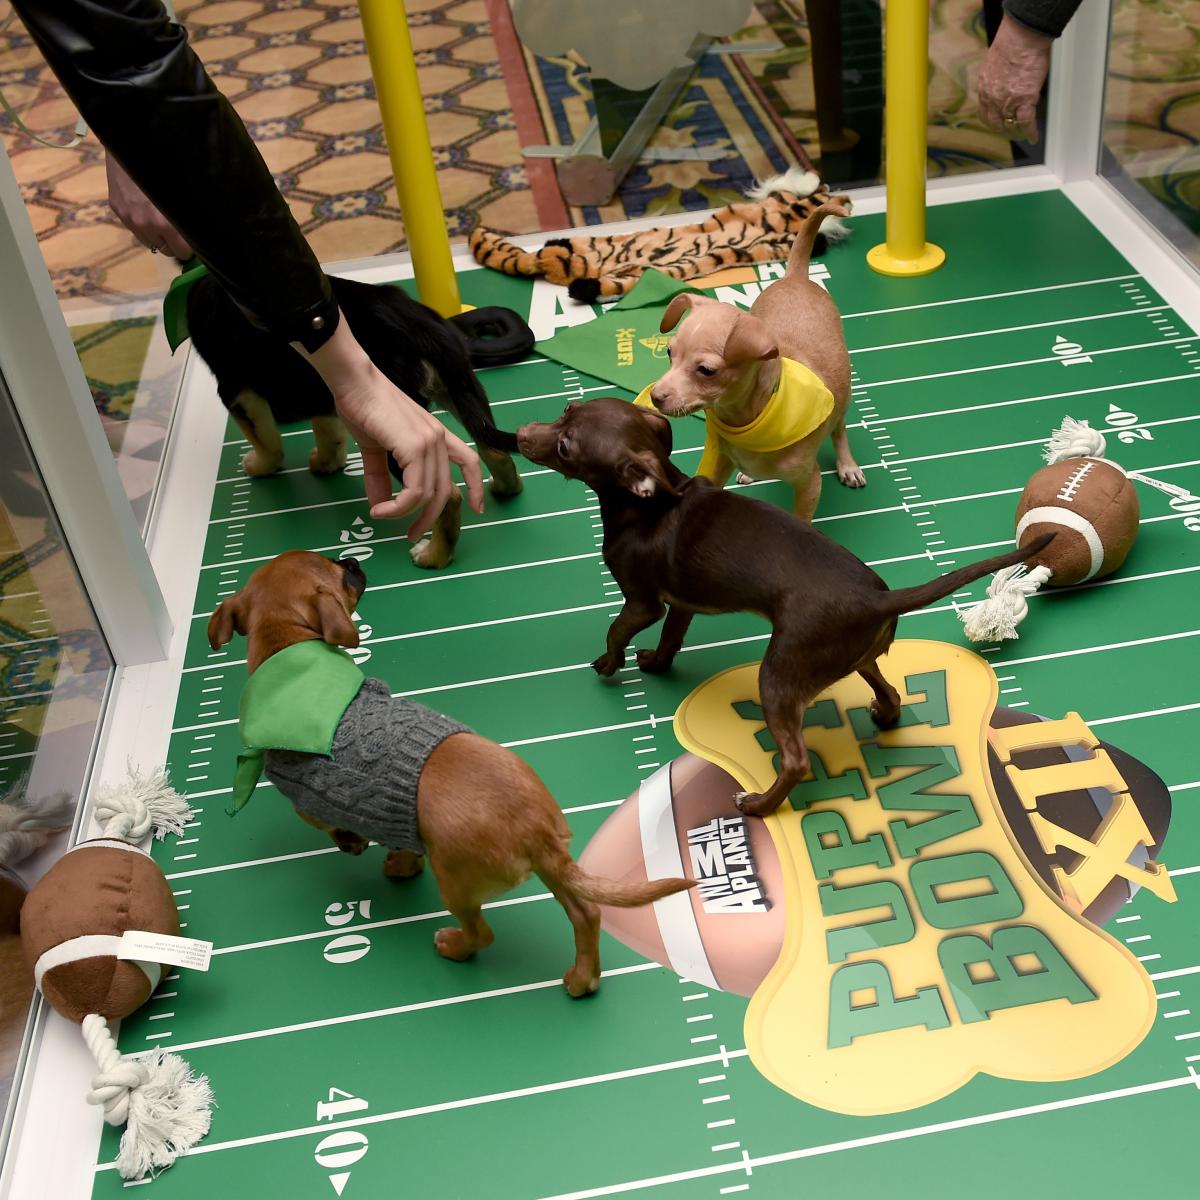 Puppy Bowl XV 2019: Date, Starting Lineup, TV Schedule and More | Bleacher Report ...